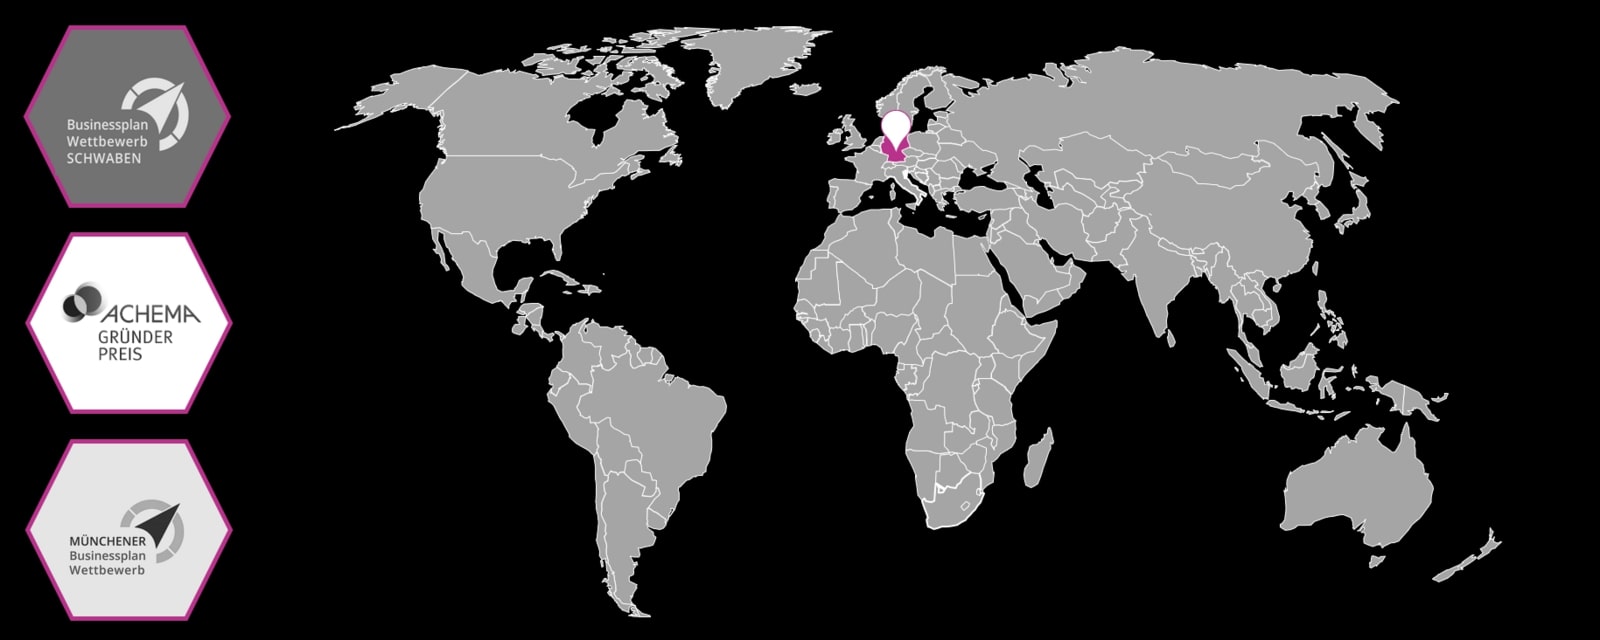 World map with a highlighted country (Germany) and the logos of three prizes (Businessplan Wettbewerb Schwaben, Achema Gründerpreis, Münchener Businessplan Wettbewerb) showing the Plasmion development story